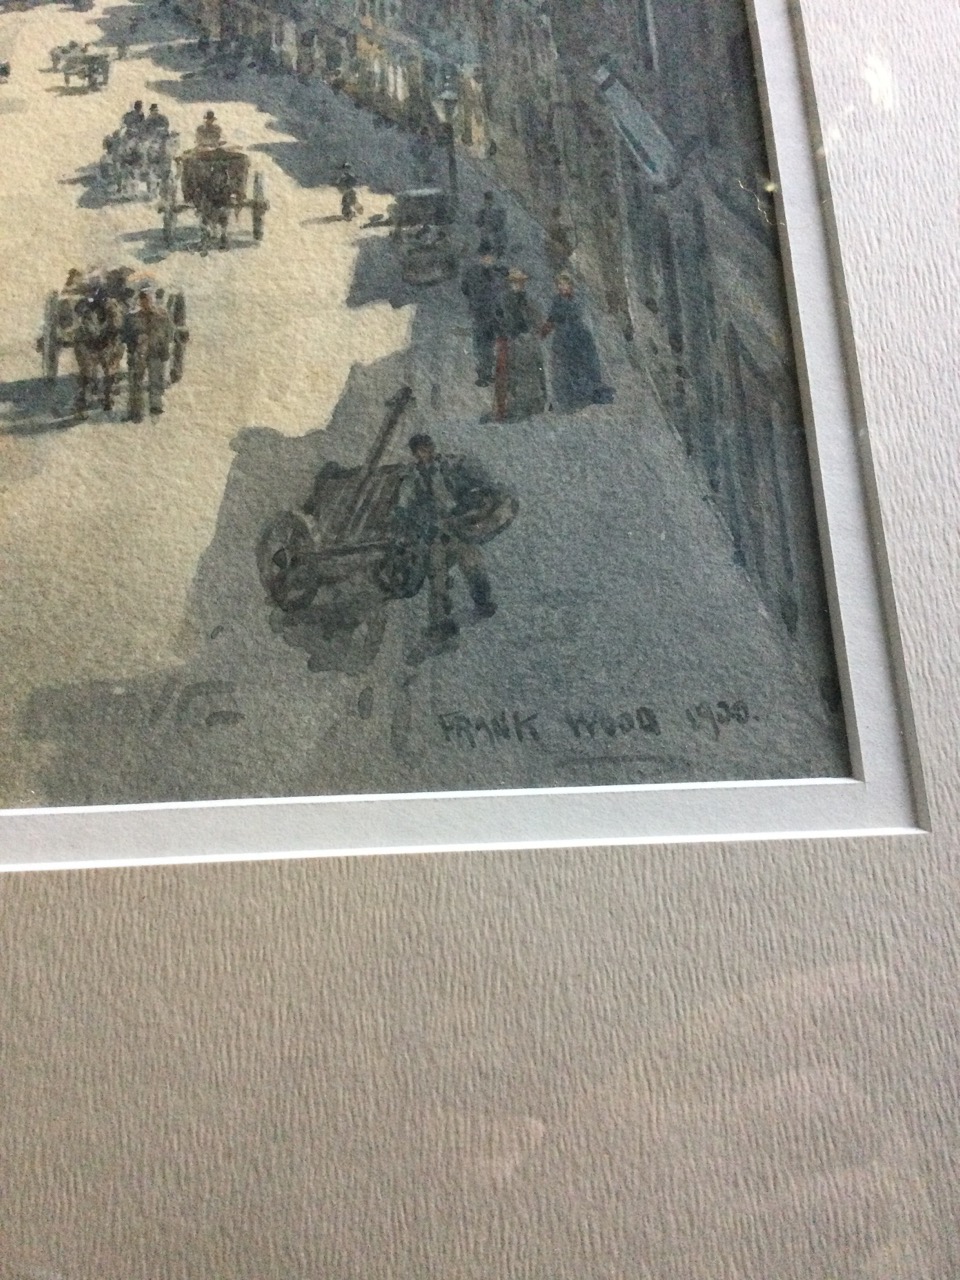 Frank Watson Wood, watercolour, view of Berwick upon Tweed looking down Marygate to the town hall, - Image 2 of 3